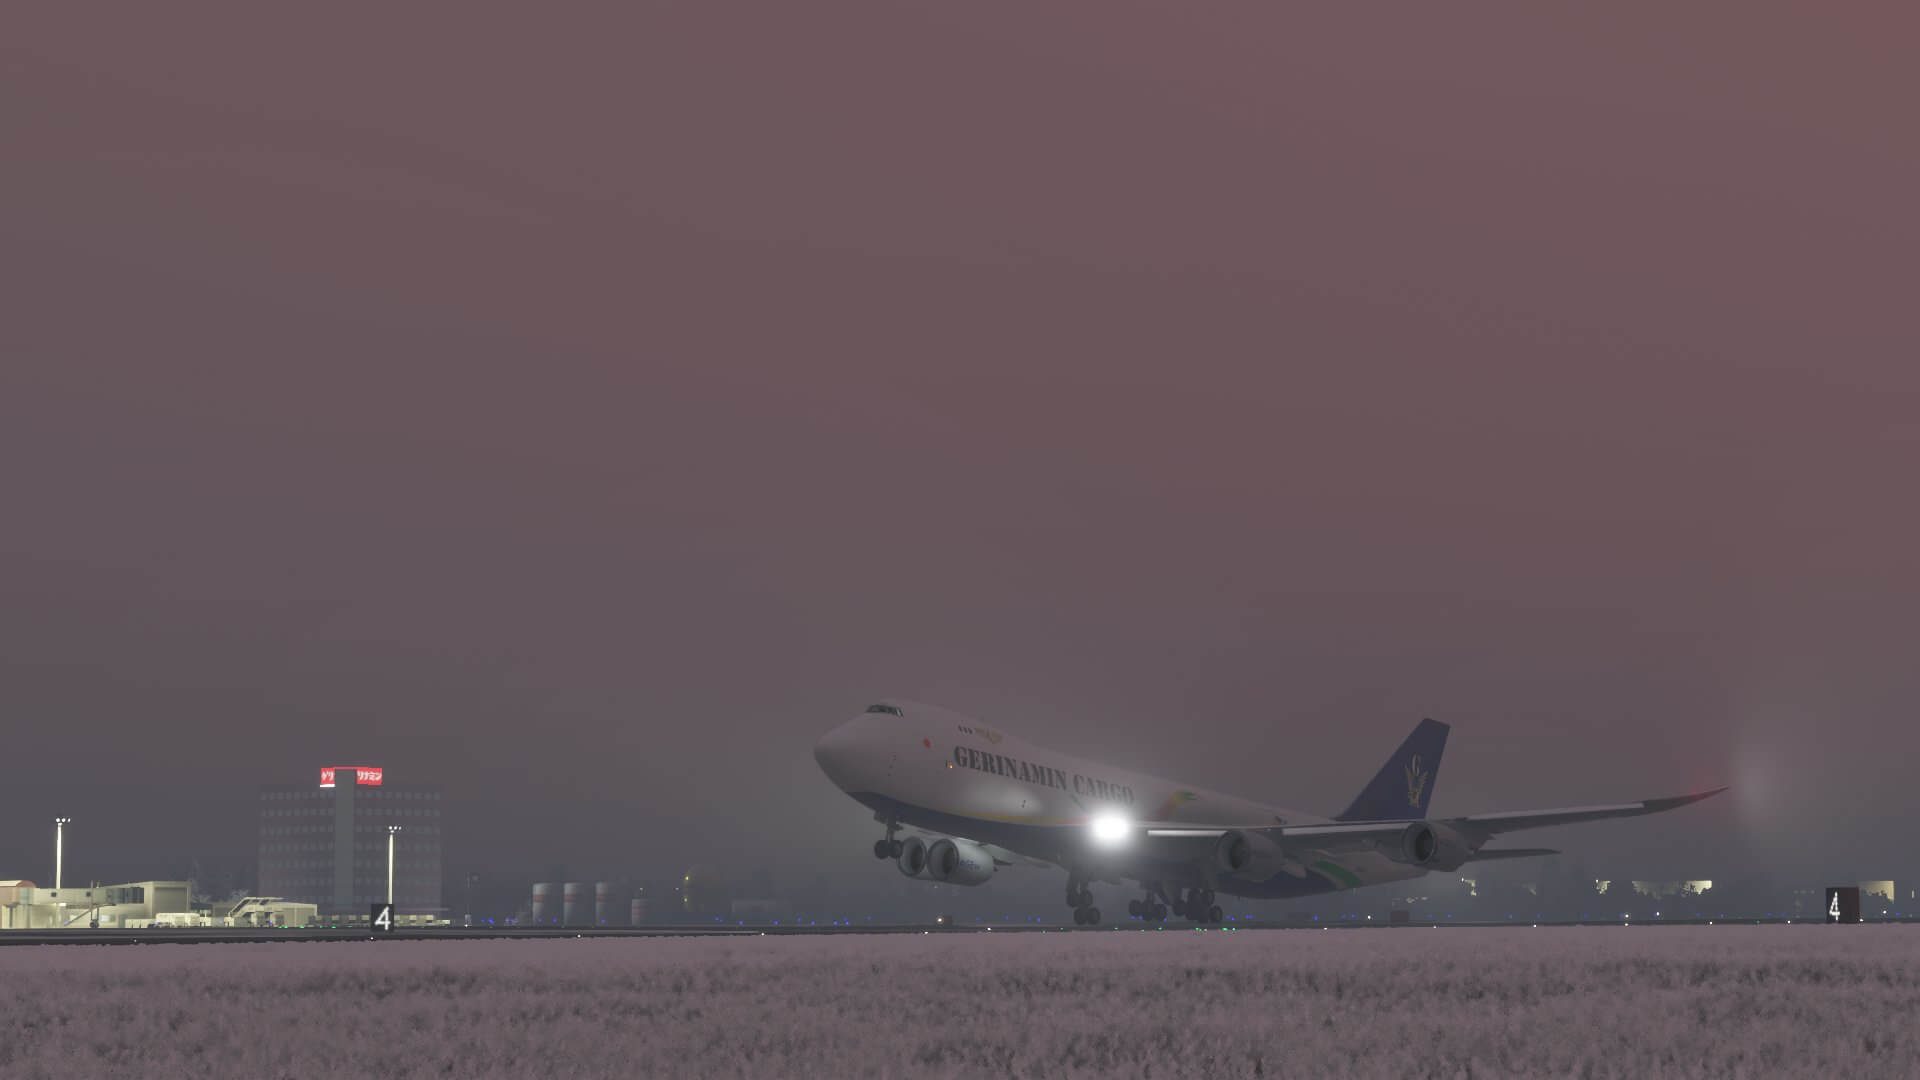 A cargo Boeing 747-8 lifts off from the runway with low visibility distorting the view.